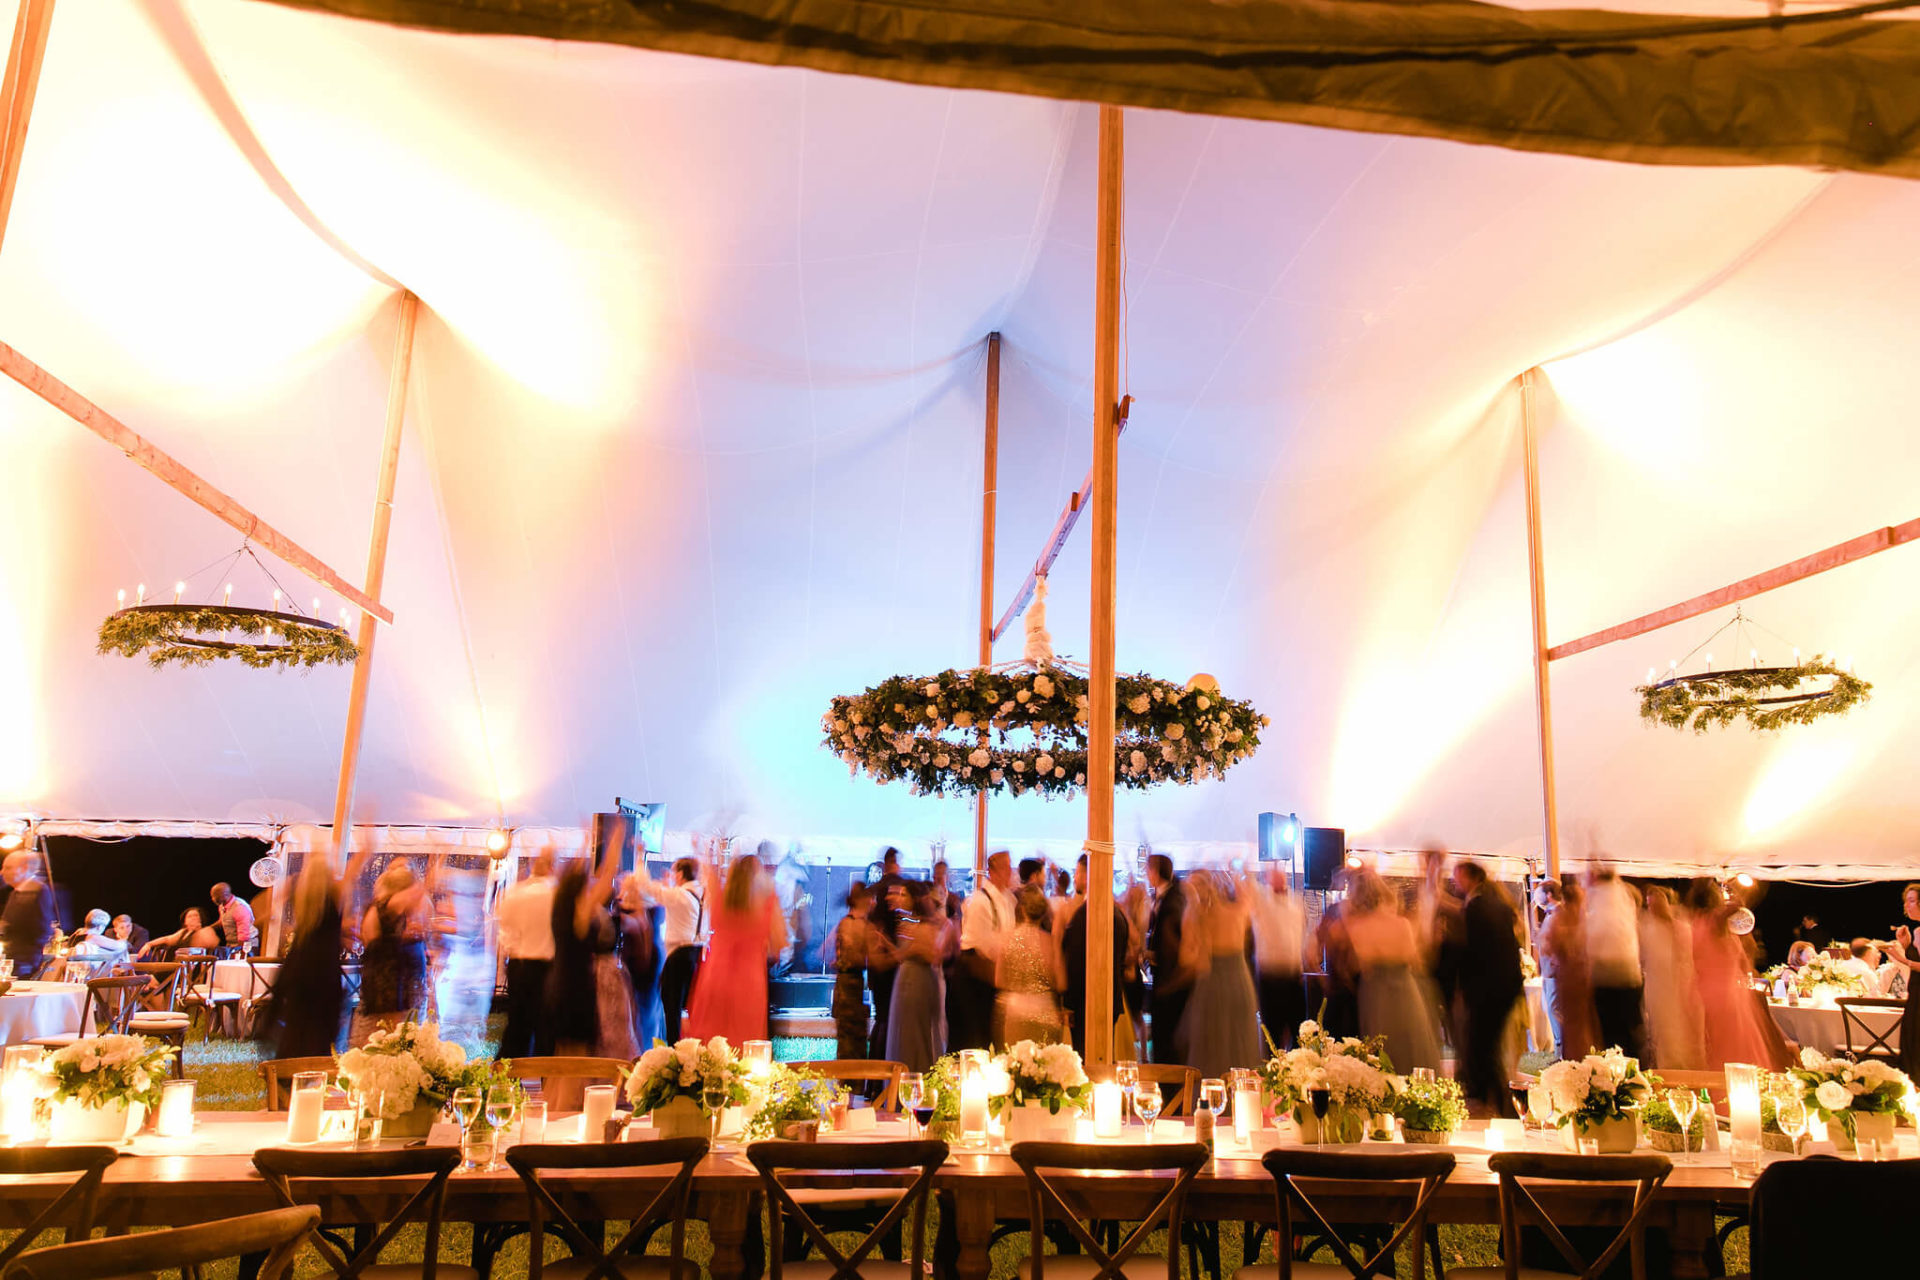 colorful uplighting inside white sail cloth tent